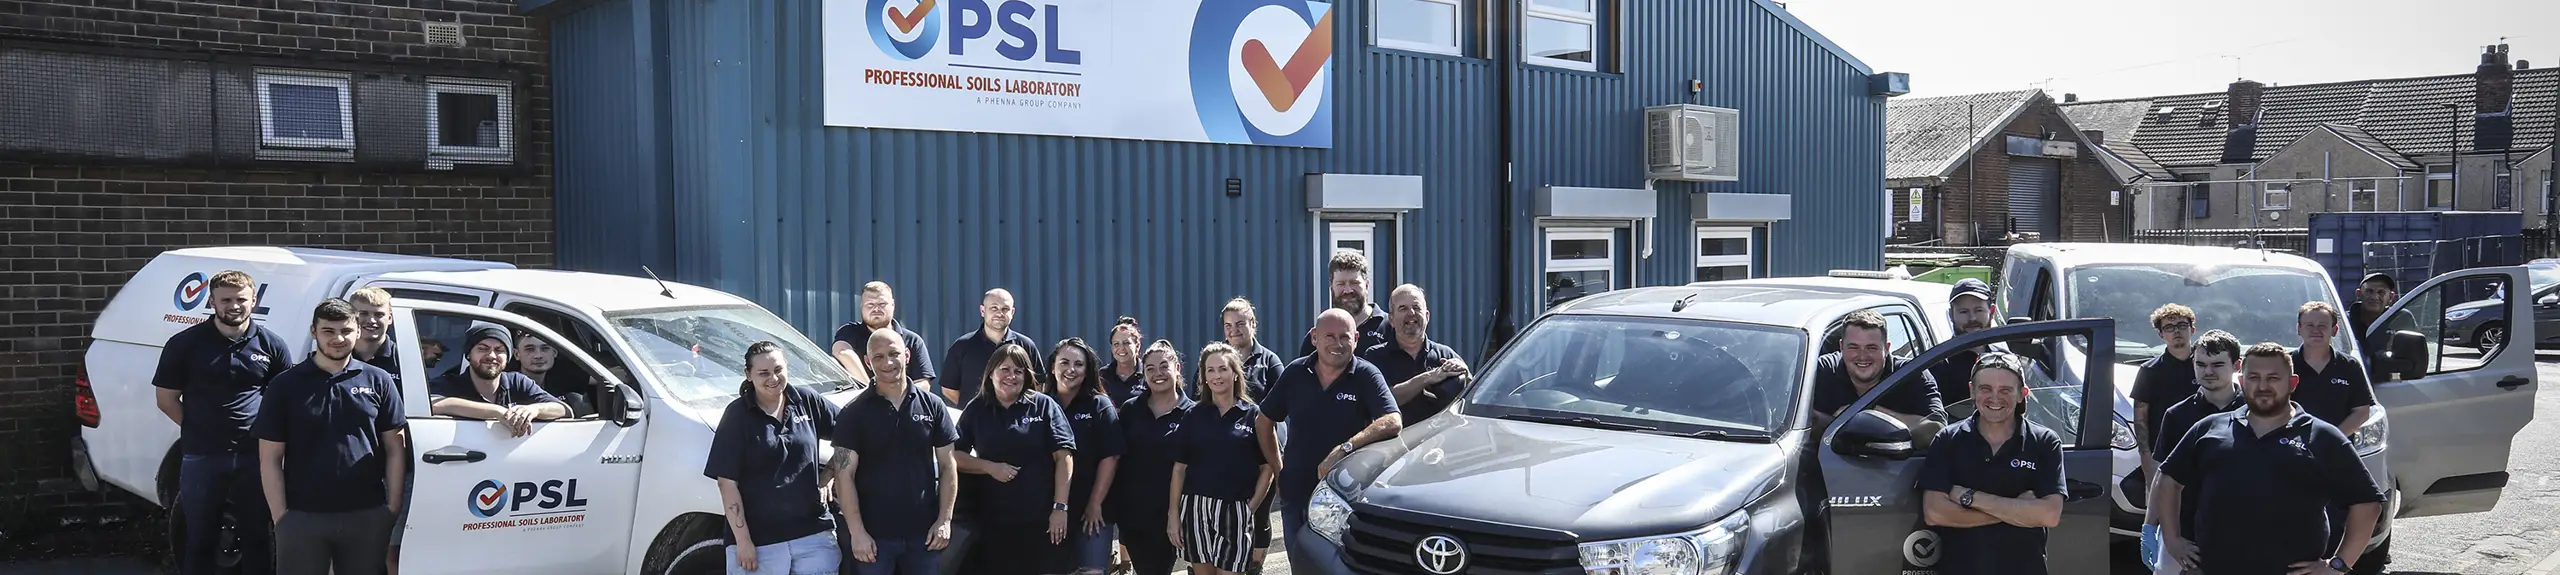 The PSL Team outside the Doncaster Head Office and Warehouse